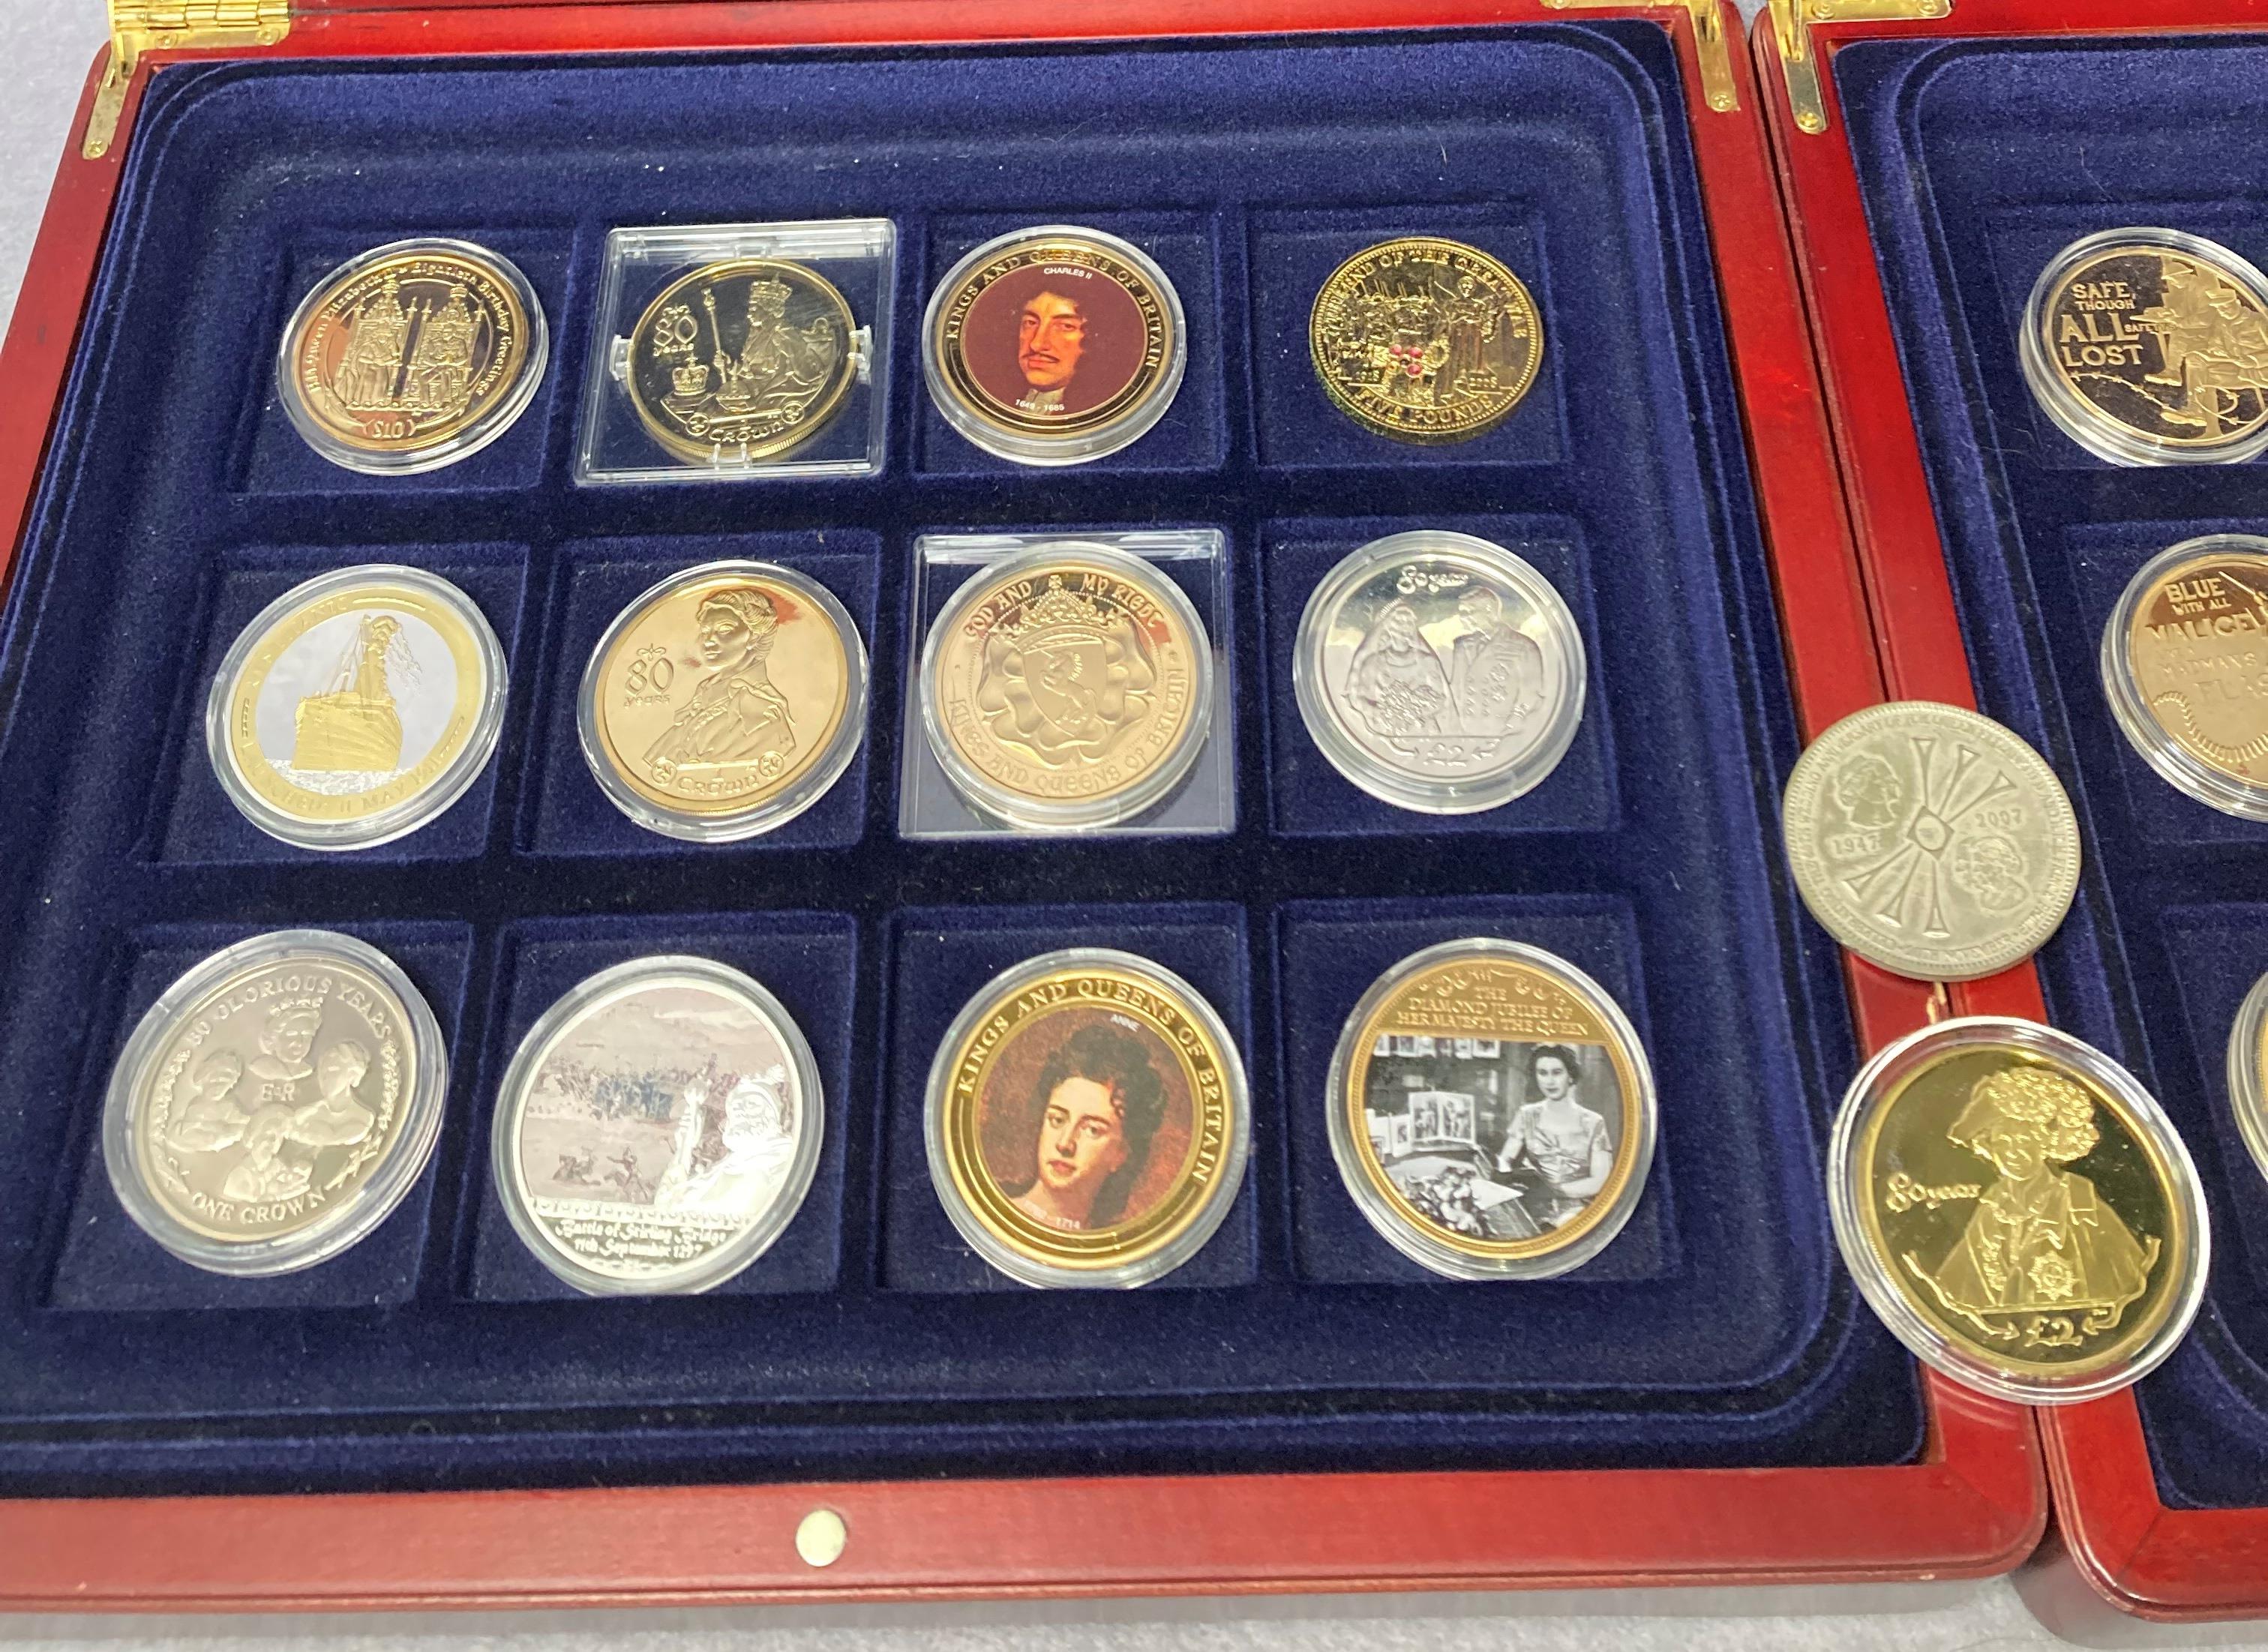 Contents to two fitted coin cases - twenty-six assorted commemorative coins some in silver and gold - Image 2 of 4